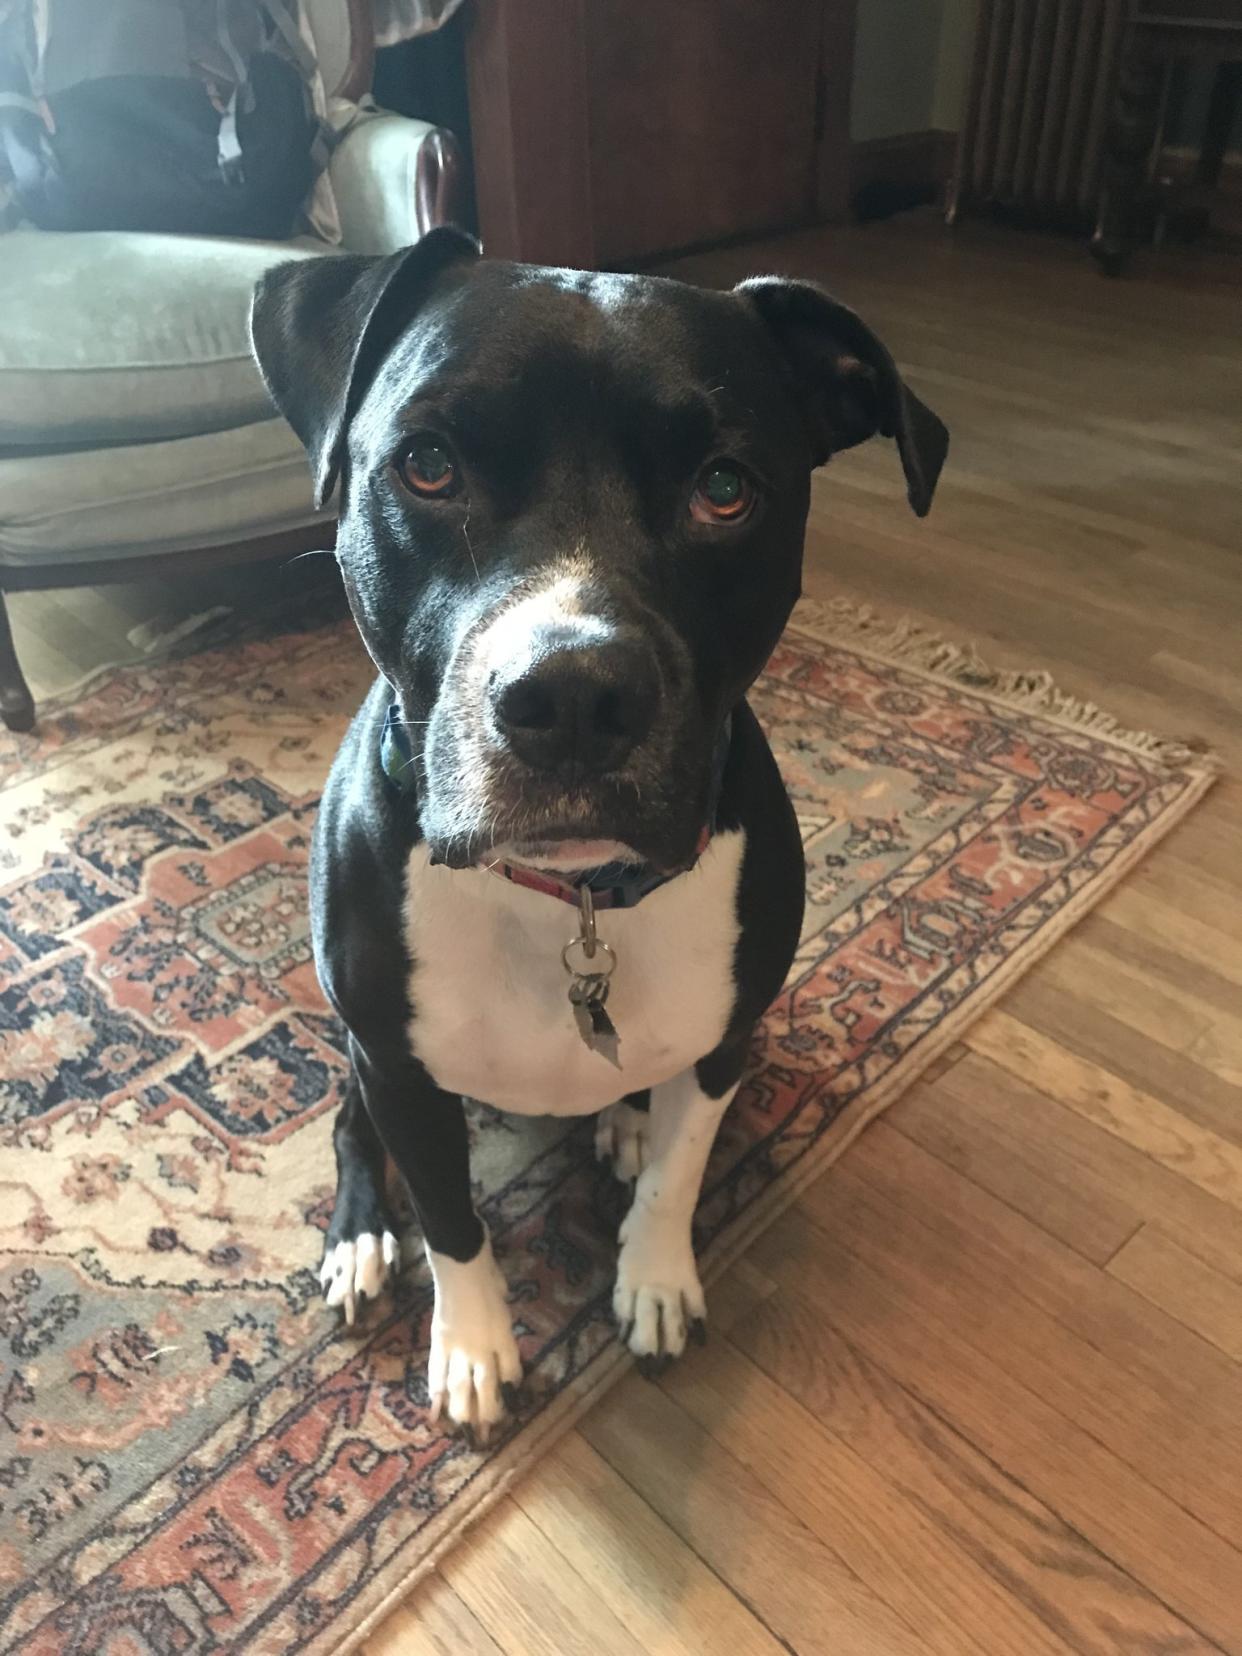 Gumbo is a 7.5 year old black and white pitbull-boxer mix. He went missing over Memorial Day weekend in Atlanta. (Credit: Michael Tyler)